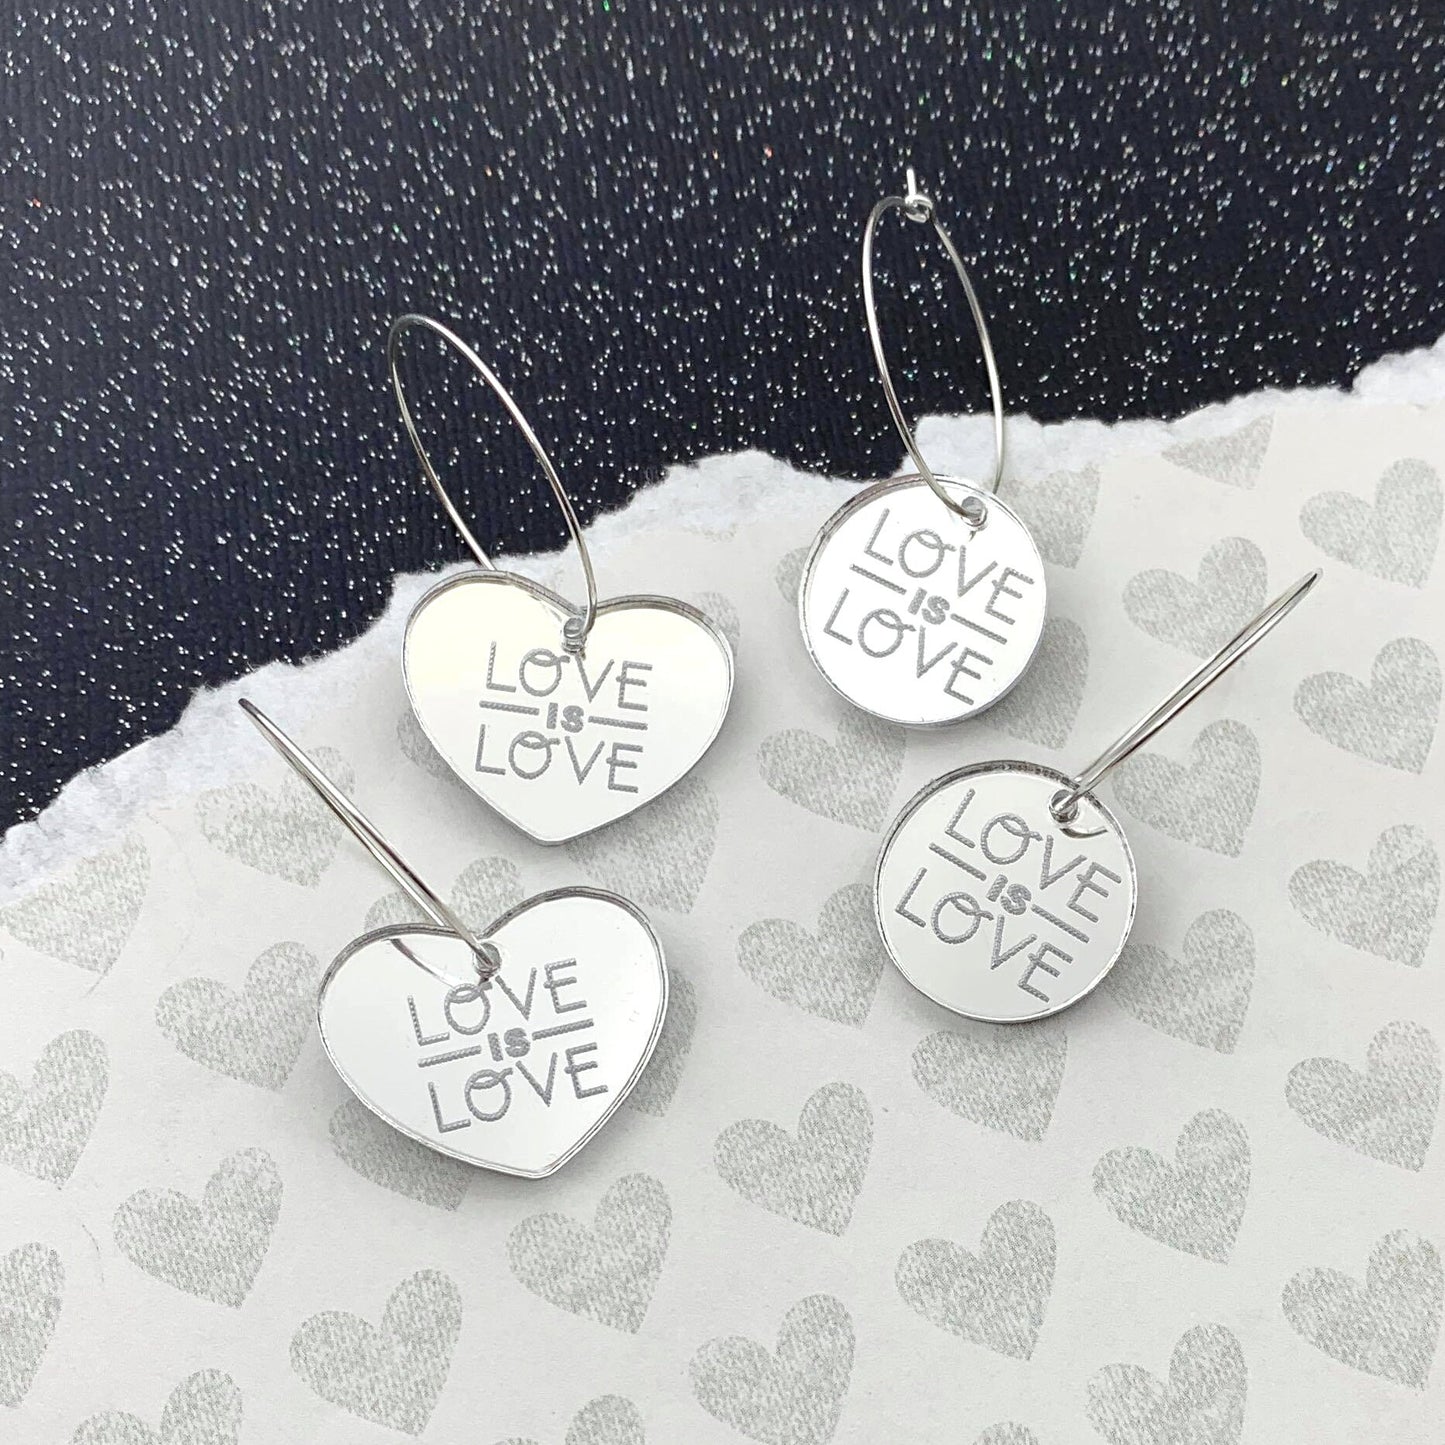 LOVE is LOVE - Laser Cut Acrylic Hoop Earrings - Activist - 100 Percent of Proceeds go to the LGBT Bar - Heart or Circle